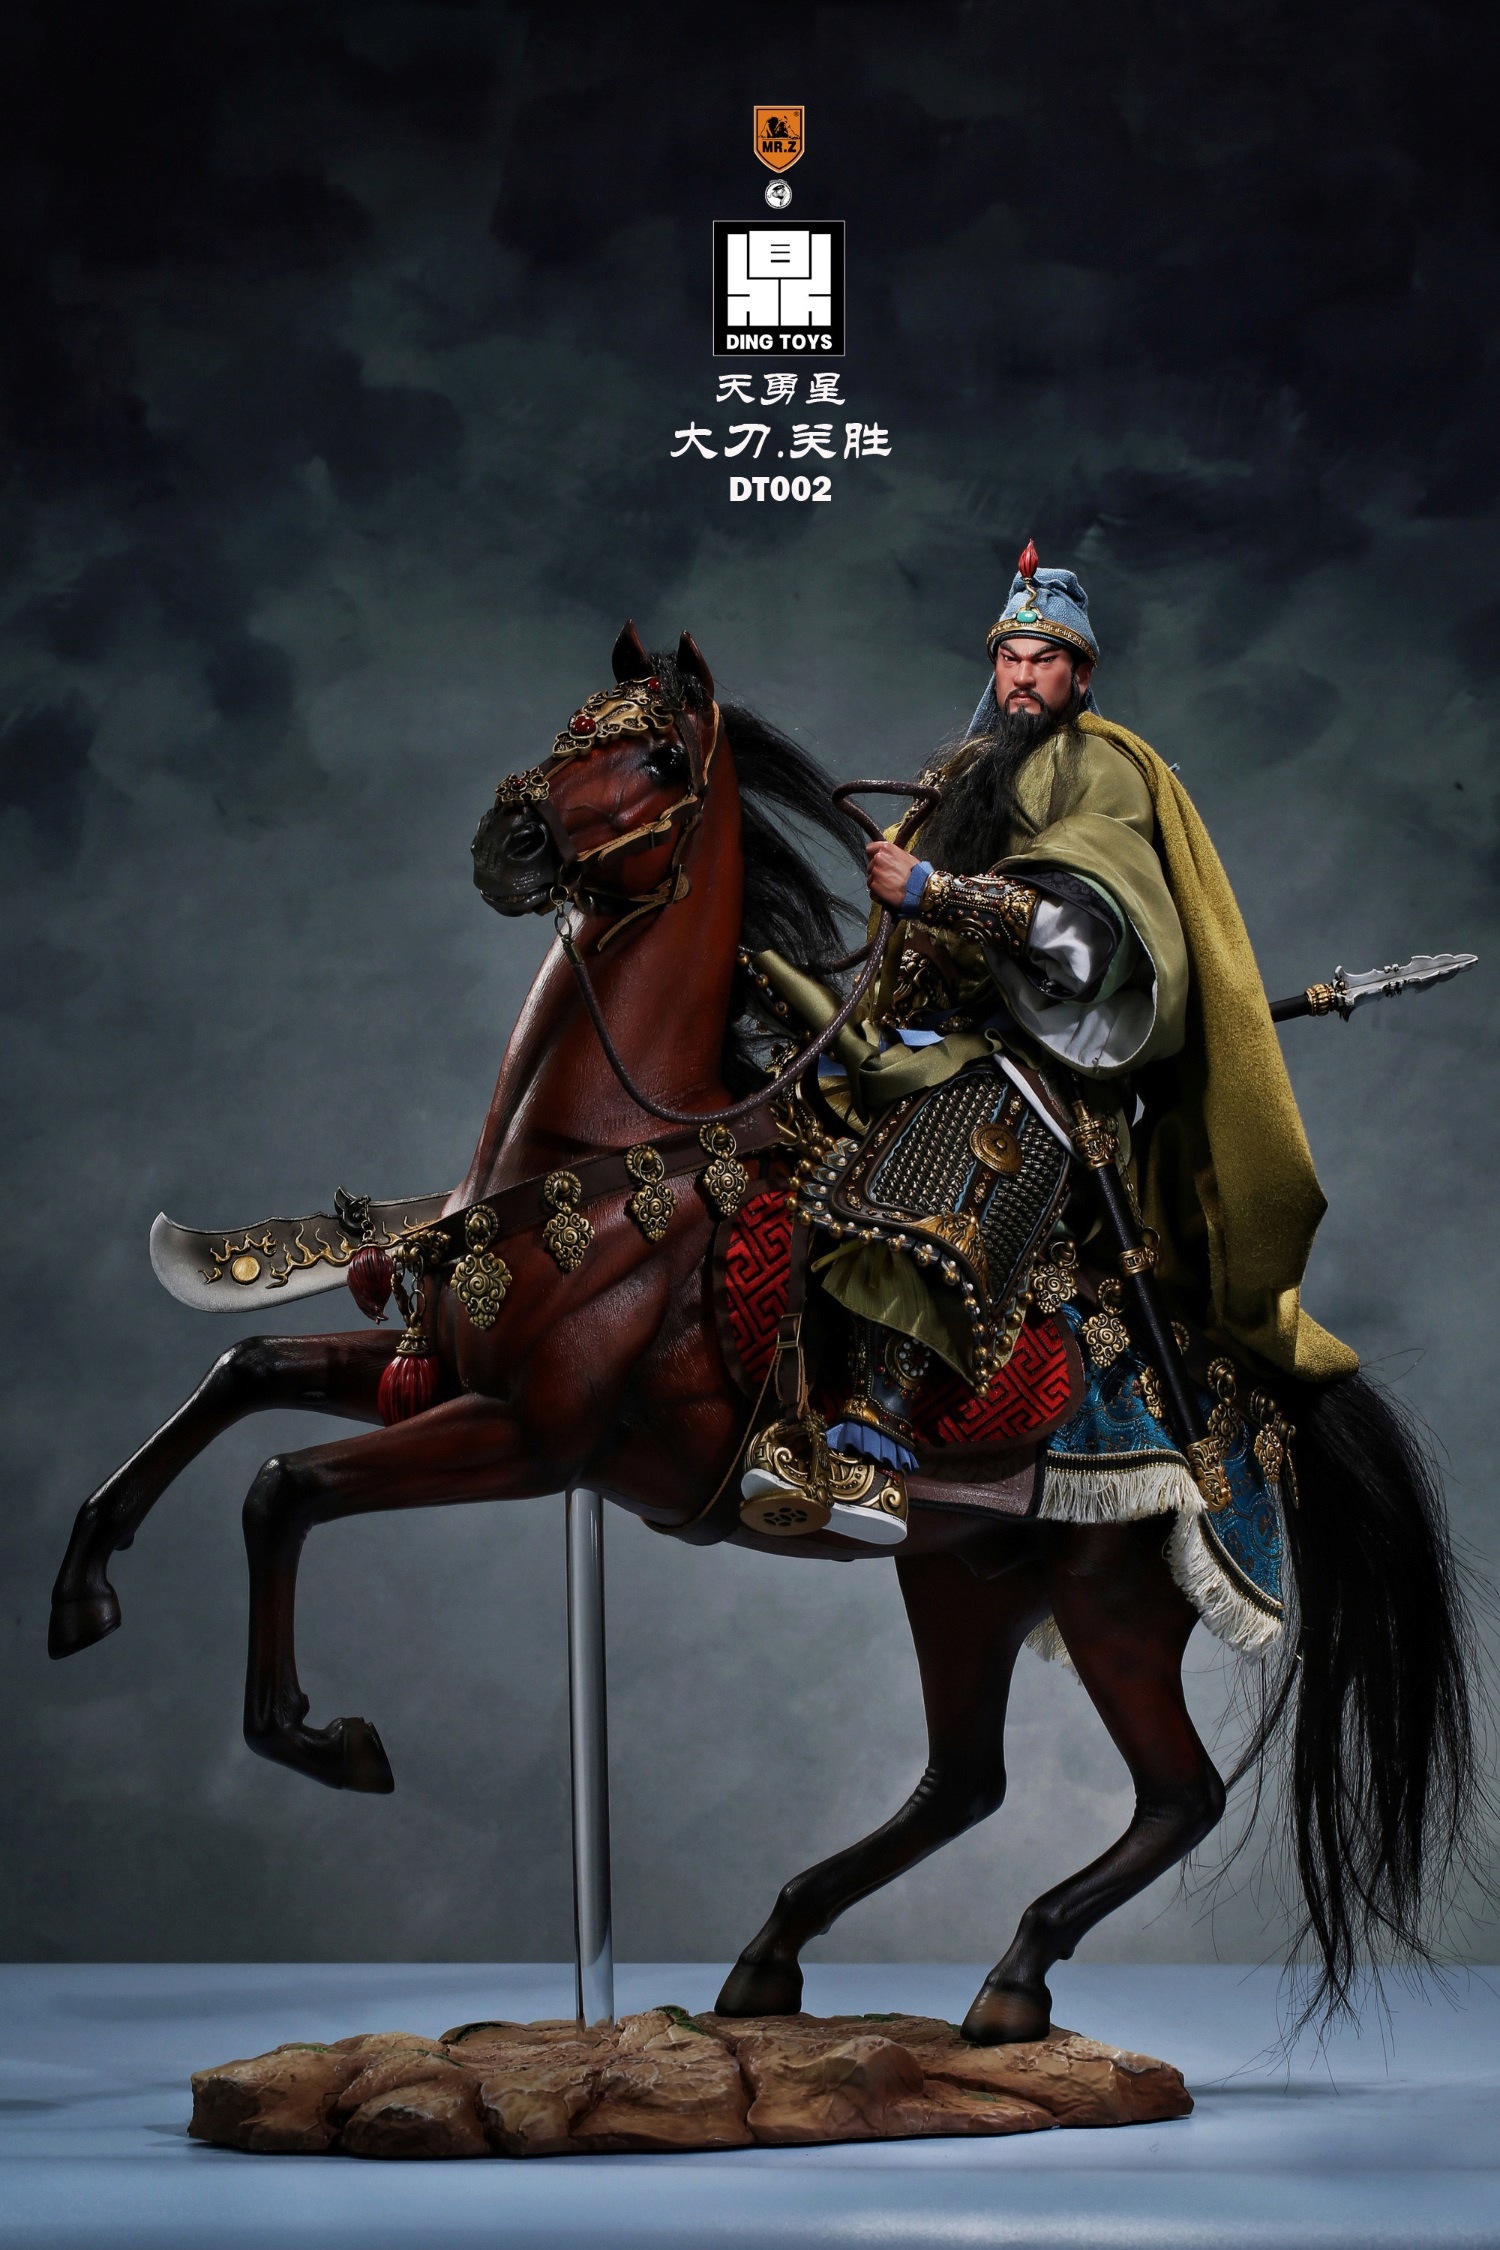 NEW PRODUCT: Mr.Z x Ding Toys DT002 1/6 Scale 《Water Margin》Guan Sheng, War Horse 08153